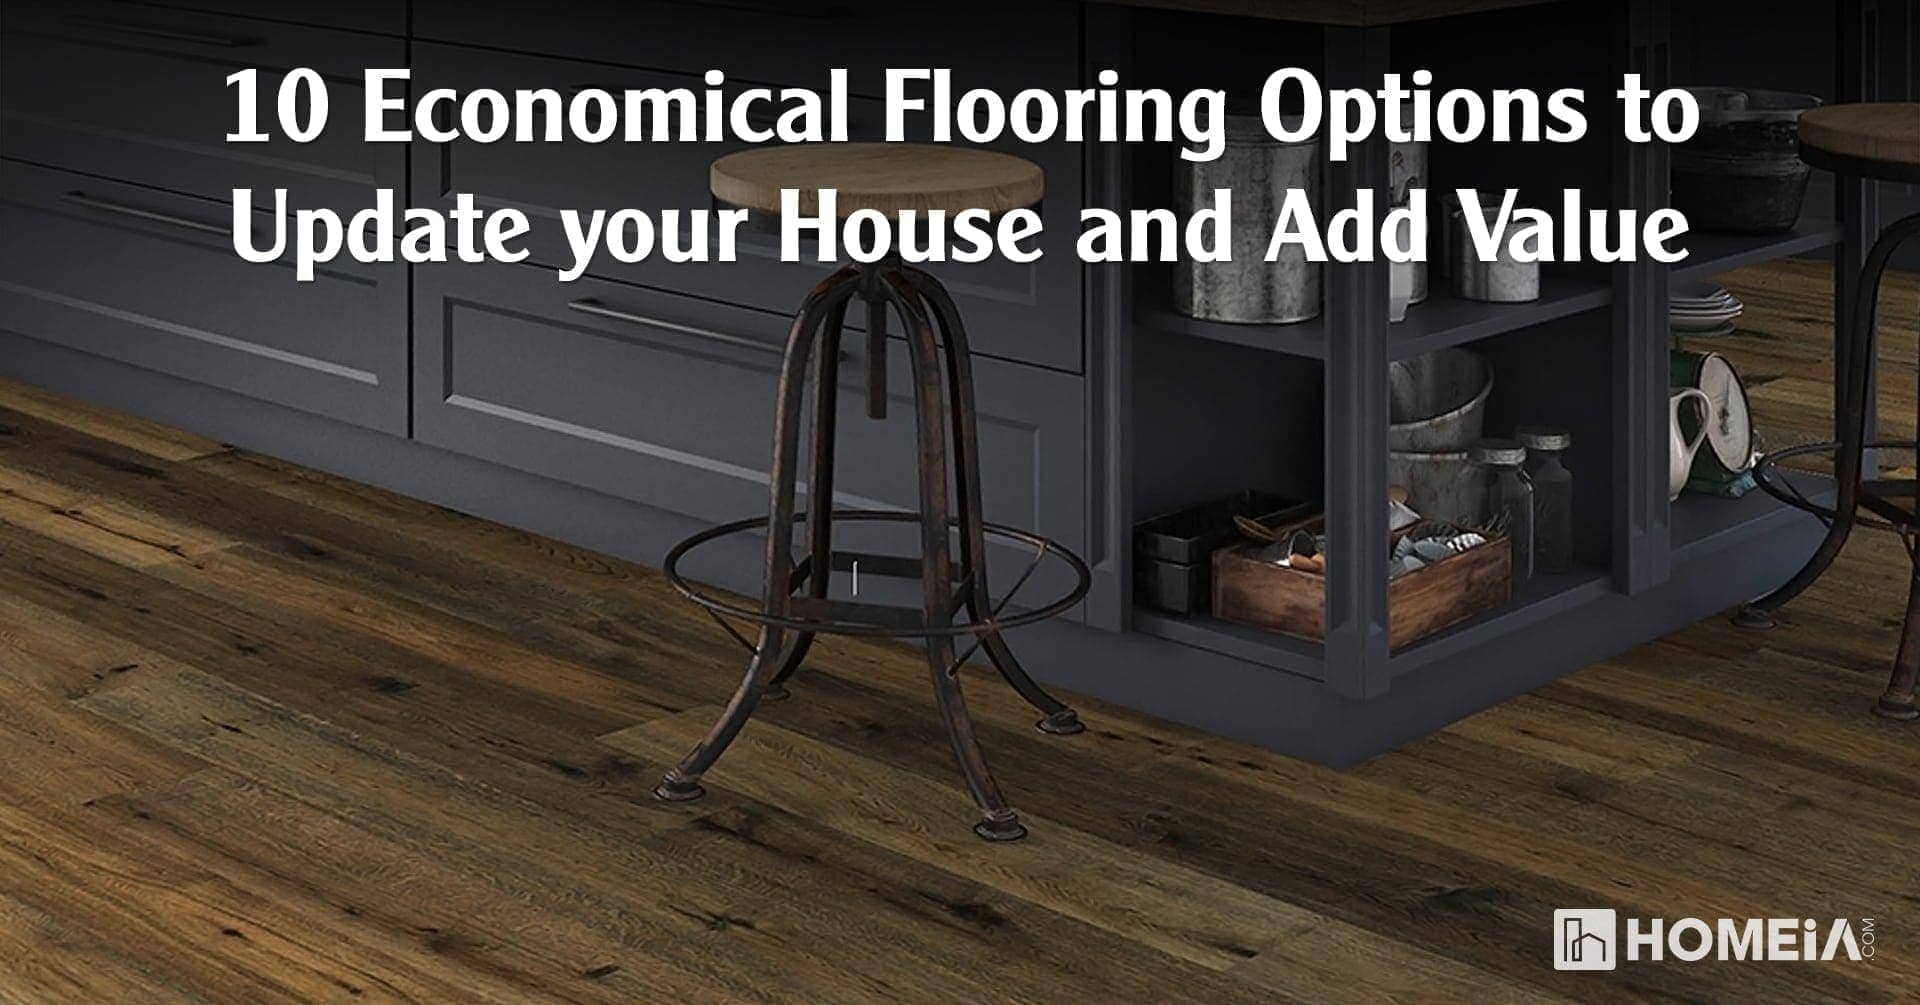 10 Economical Flooring Options to Update your House & Add Value | HOMEiA